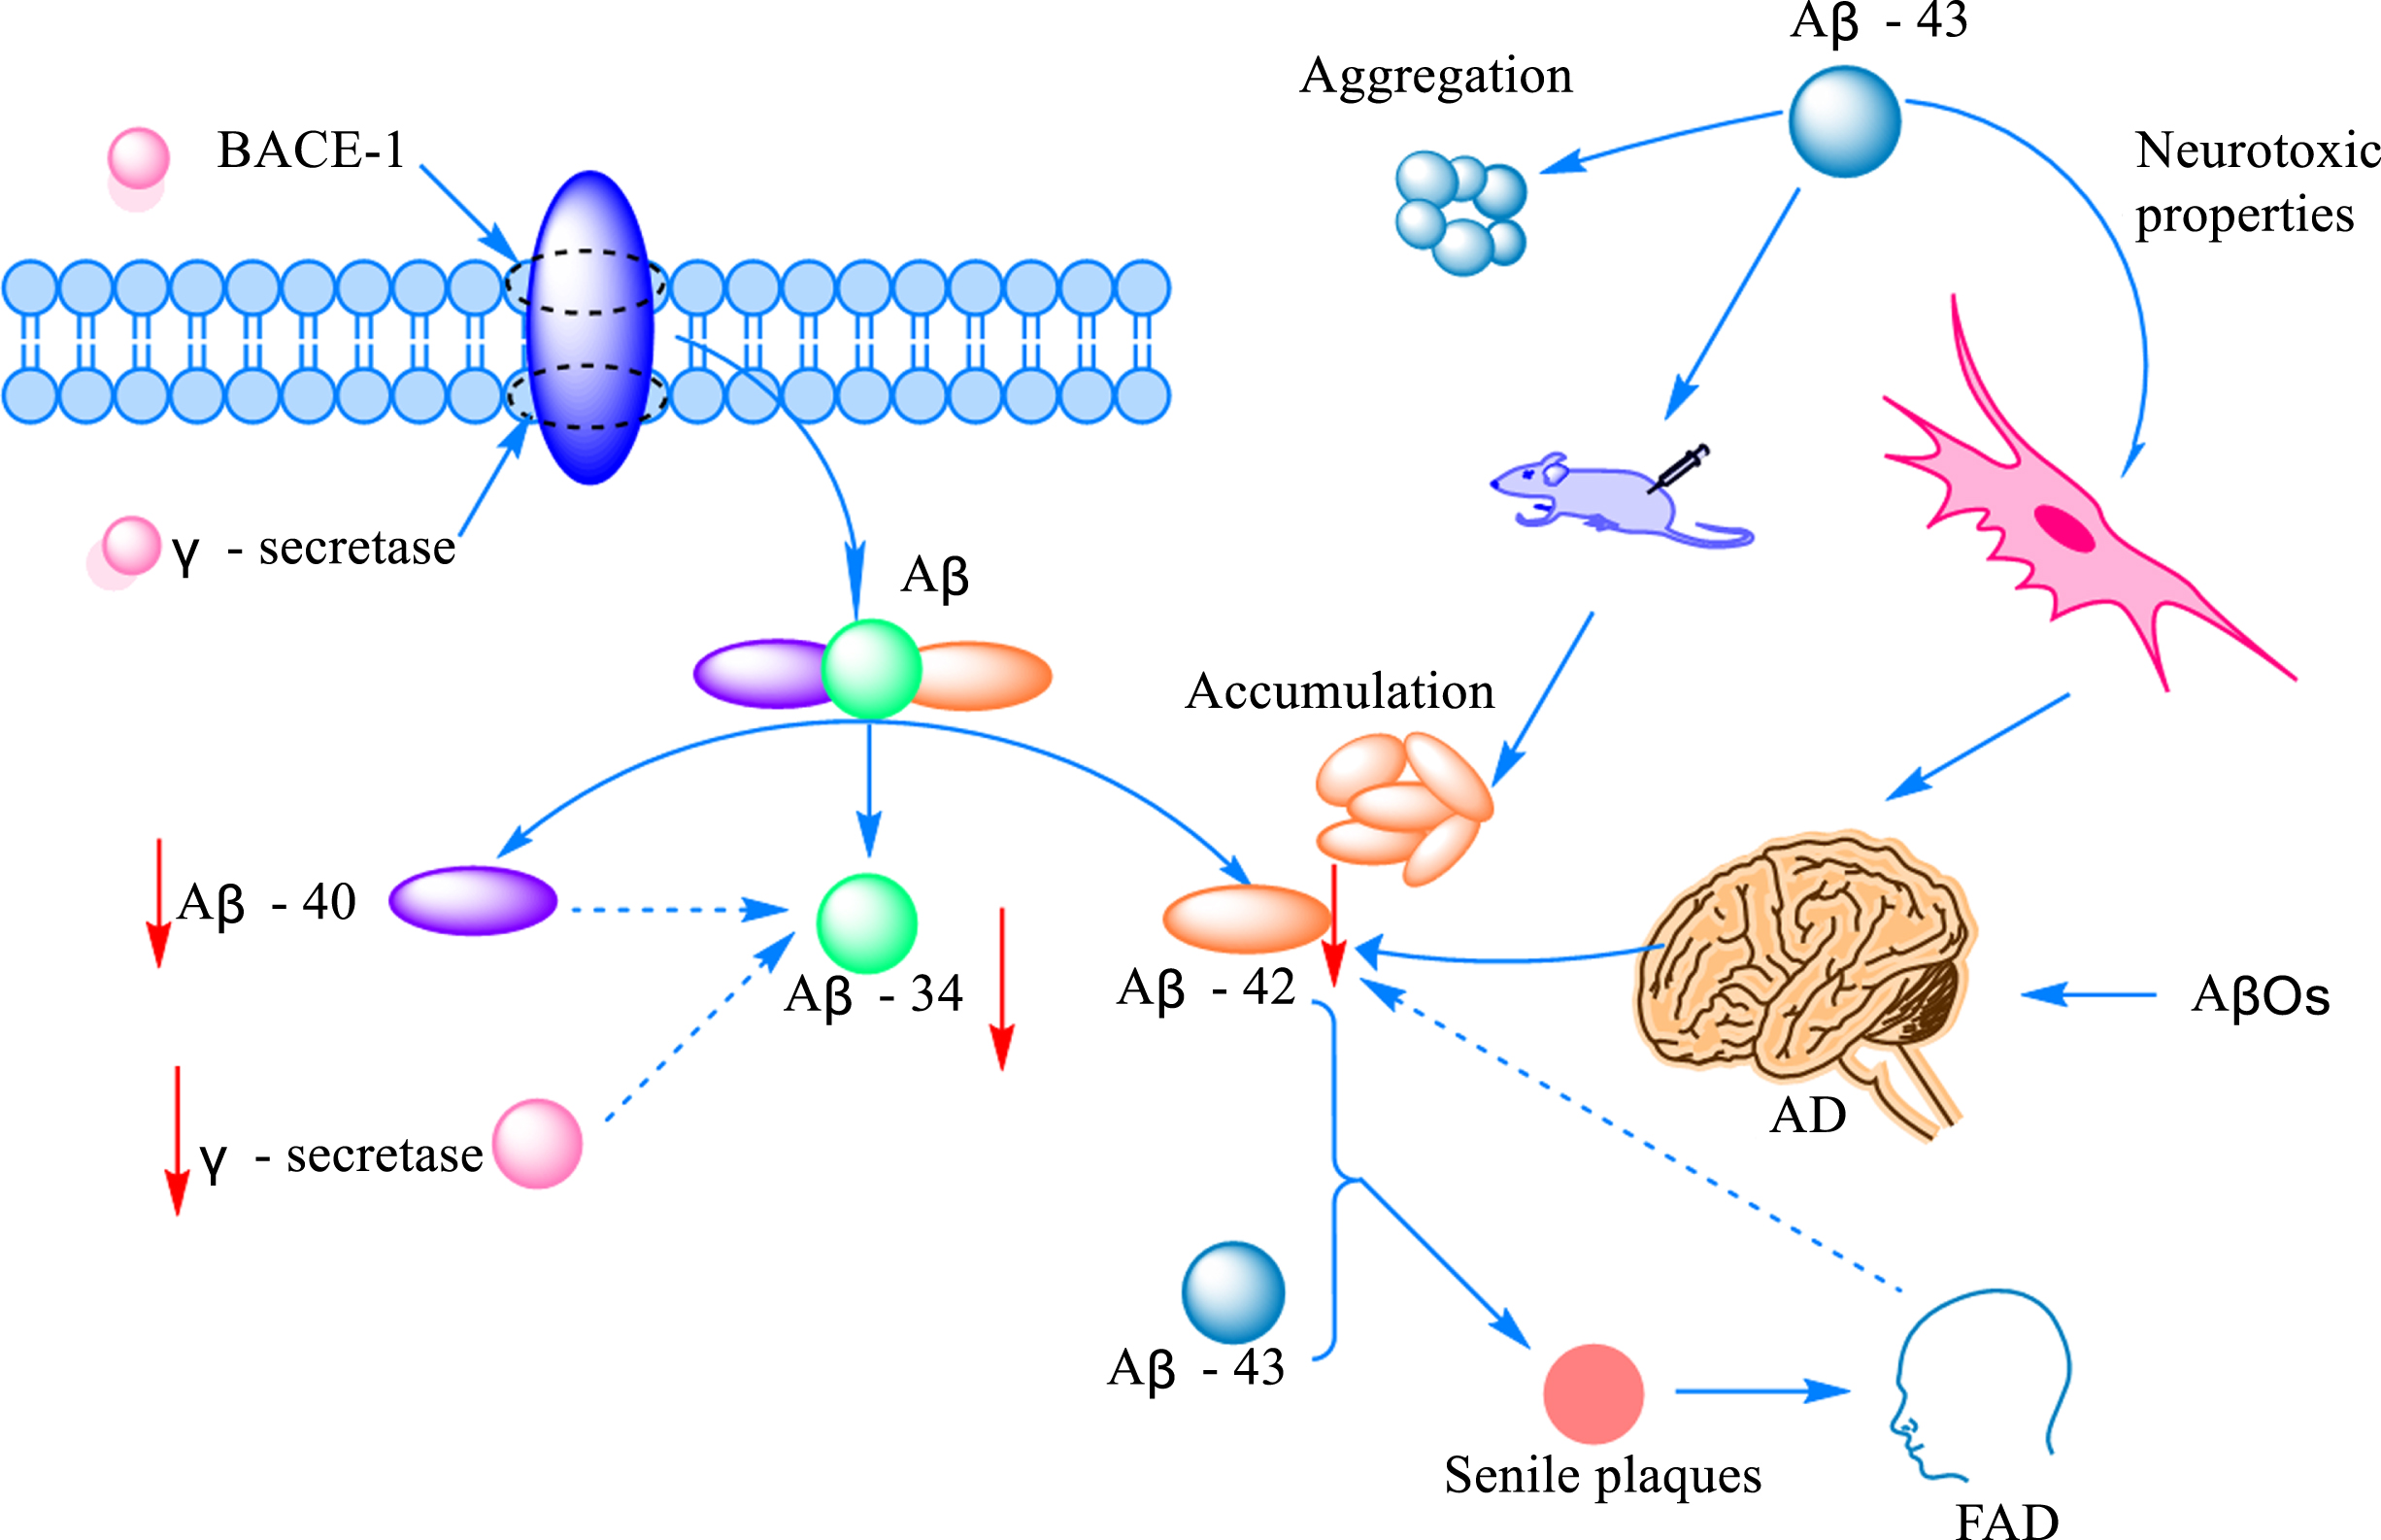 The mechanism of Aβ-mediated AD onset. The amount of Aβ produced by cleaved AβPP increased with the increased expression of protein amyloid pre-β-degrading enzyme 1 (BACE-1) and γ-secretase. Cleavage generates Aβ peptides of various lengths, commonly including Aβ40 and Aβ42, as well as the intermediate Aβ34. The production of Aβ34 correlates with the activities of Aβ42 and γ-secretase. Aβ43 is another Aβ protein peptide with obvious aggregation and neurotoxicity. Aβ42 can promote plaque formation and induce the occurrence of FAD at the same time, but studies have found that Aβ42 was decreased in the brain of AD and FAD patients.